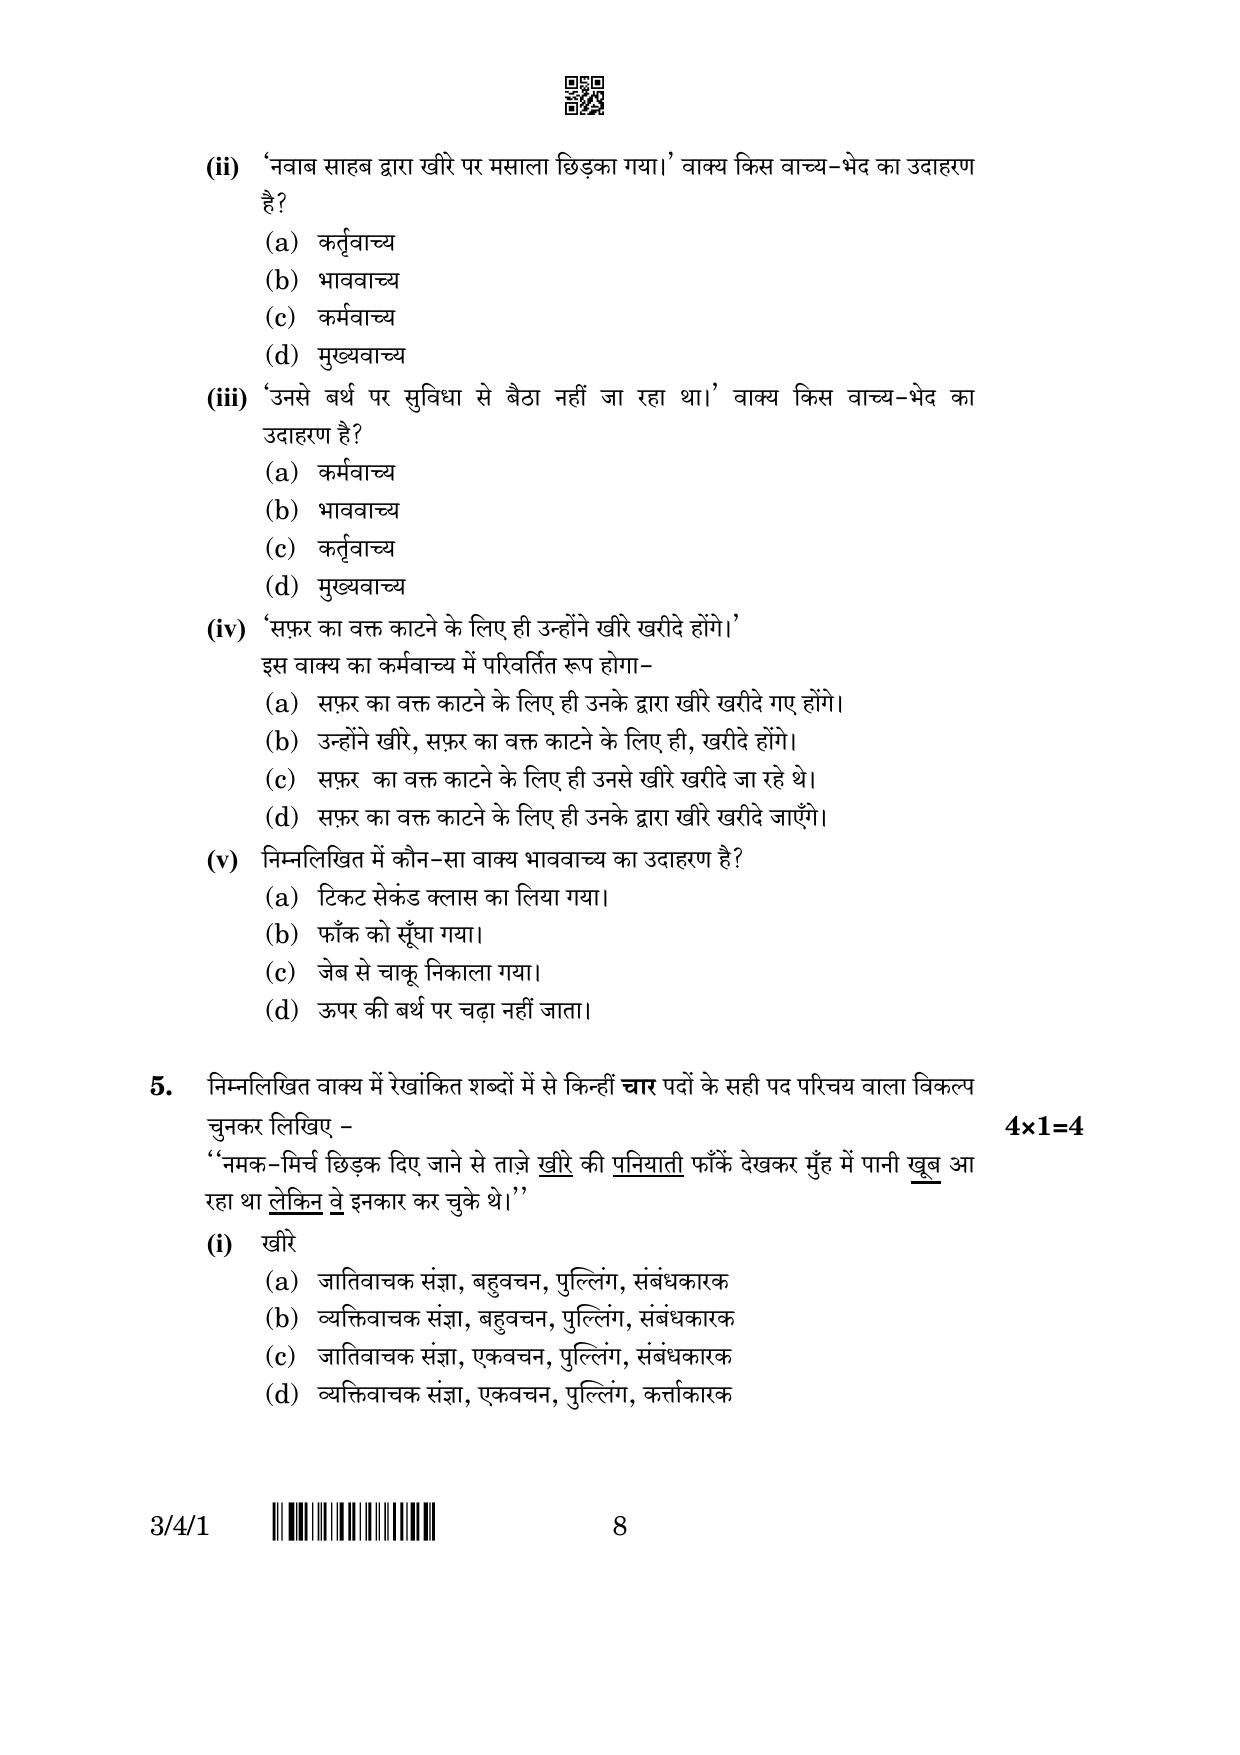 CBSE Class 10 3-4-1 Hindi A 2023 Question Paper - Page 8